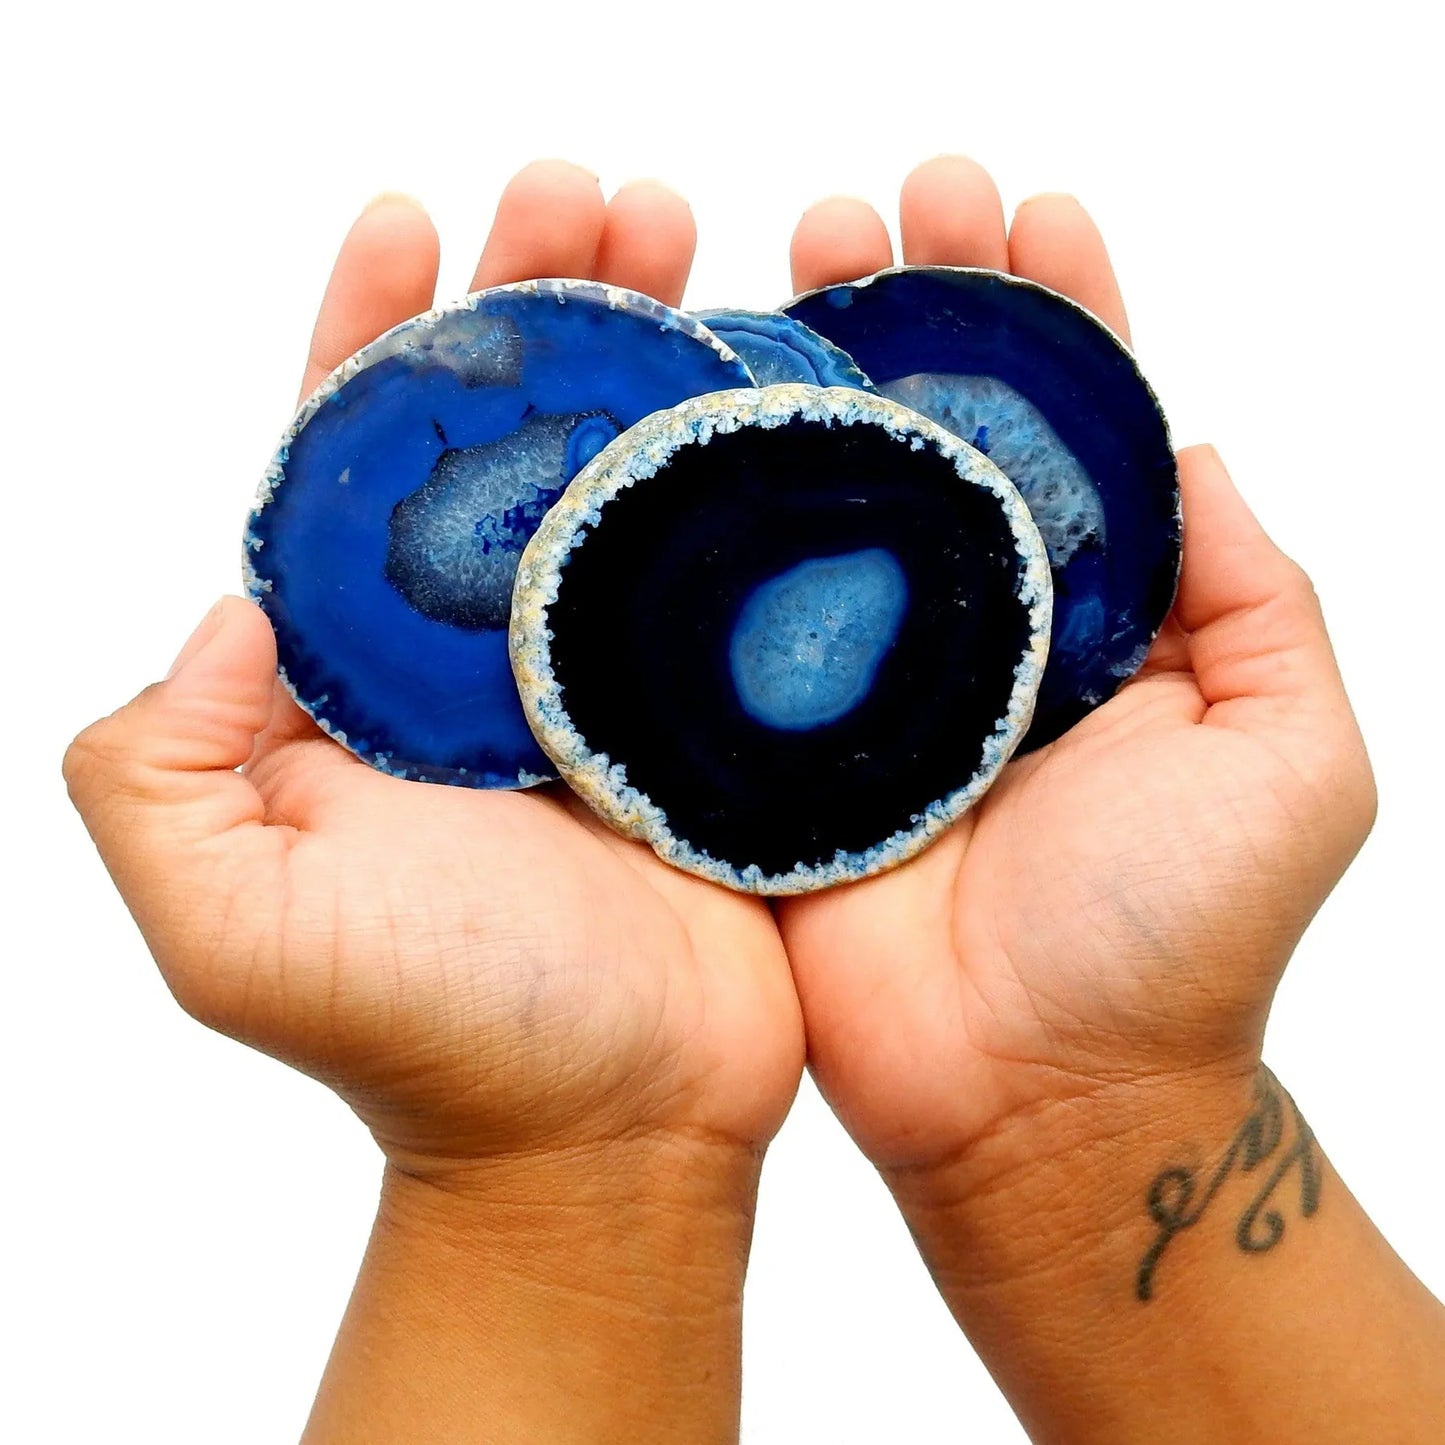 " Only you can decide what breaks you." | Blue Agate Slice Shelf Sitter | Multiple colors available